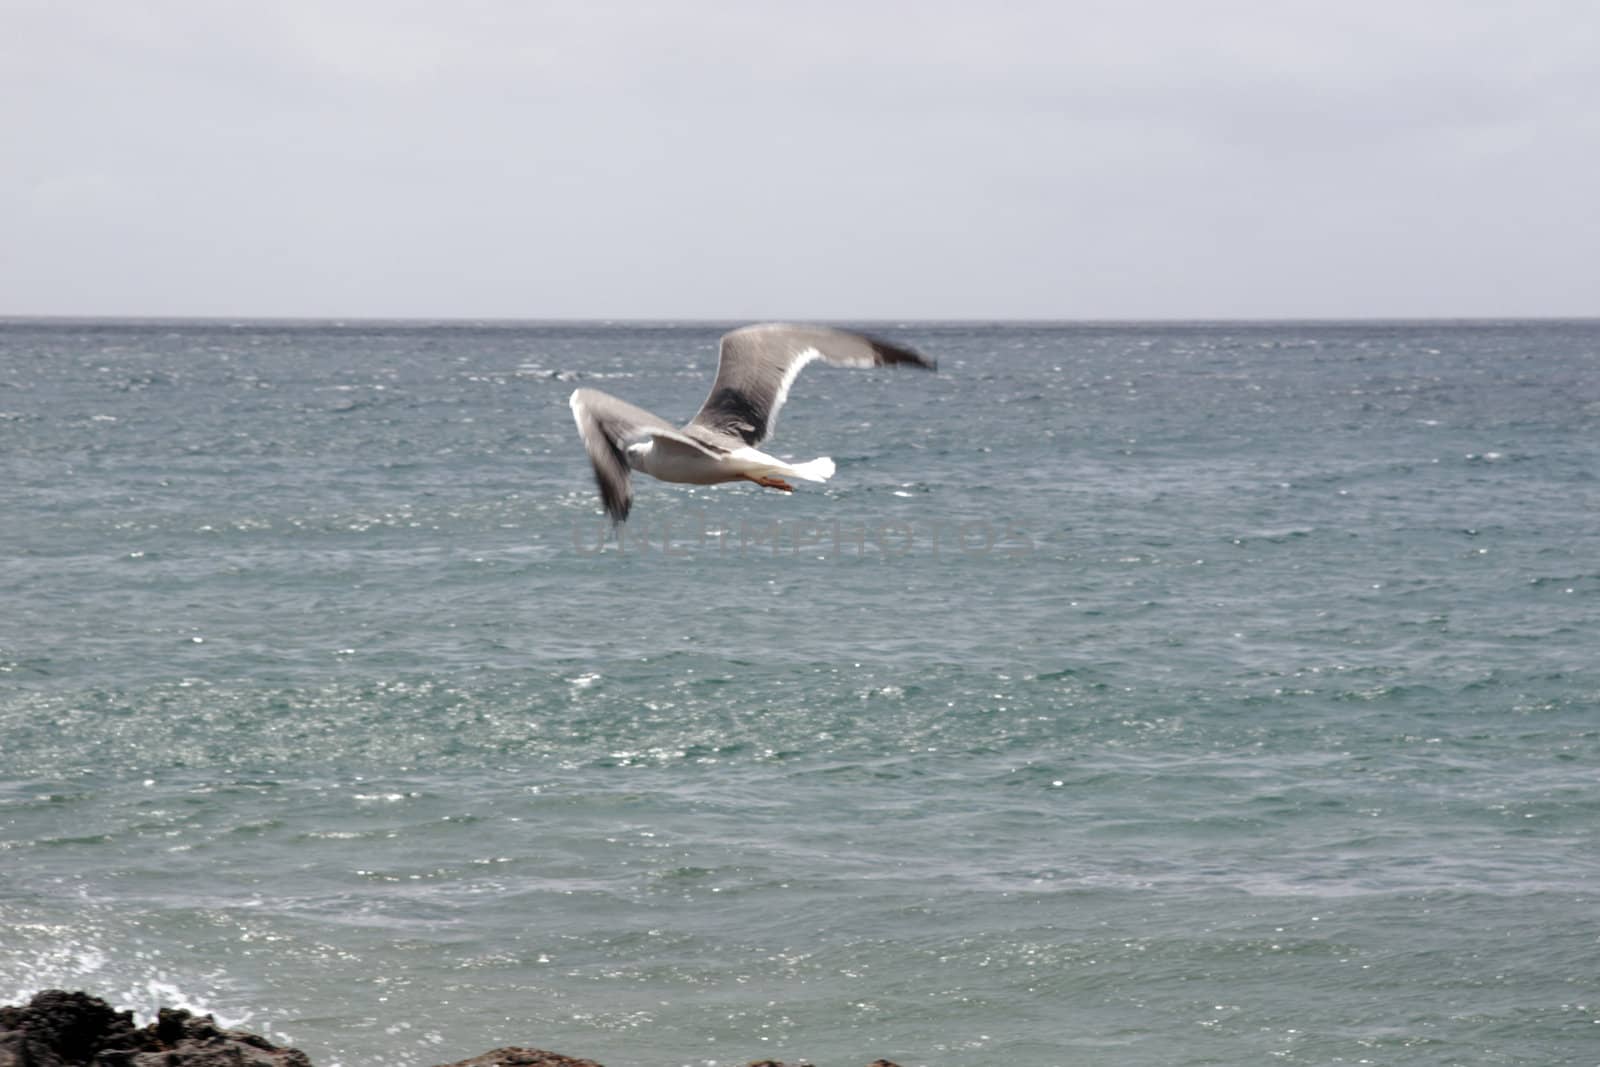 a seagull in flight over the sea